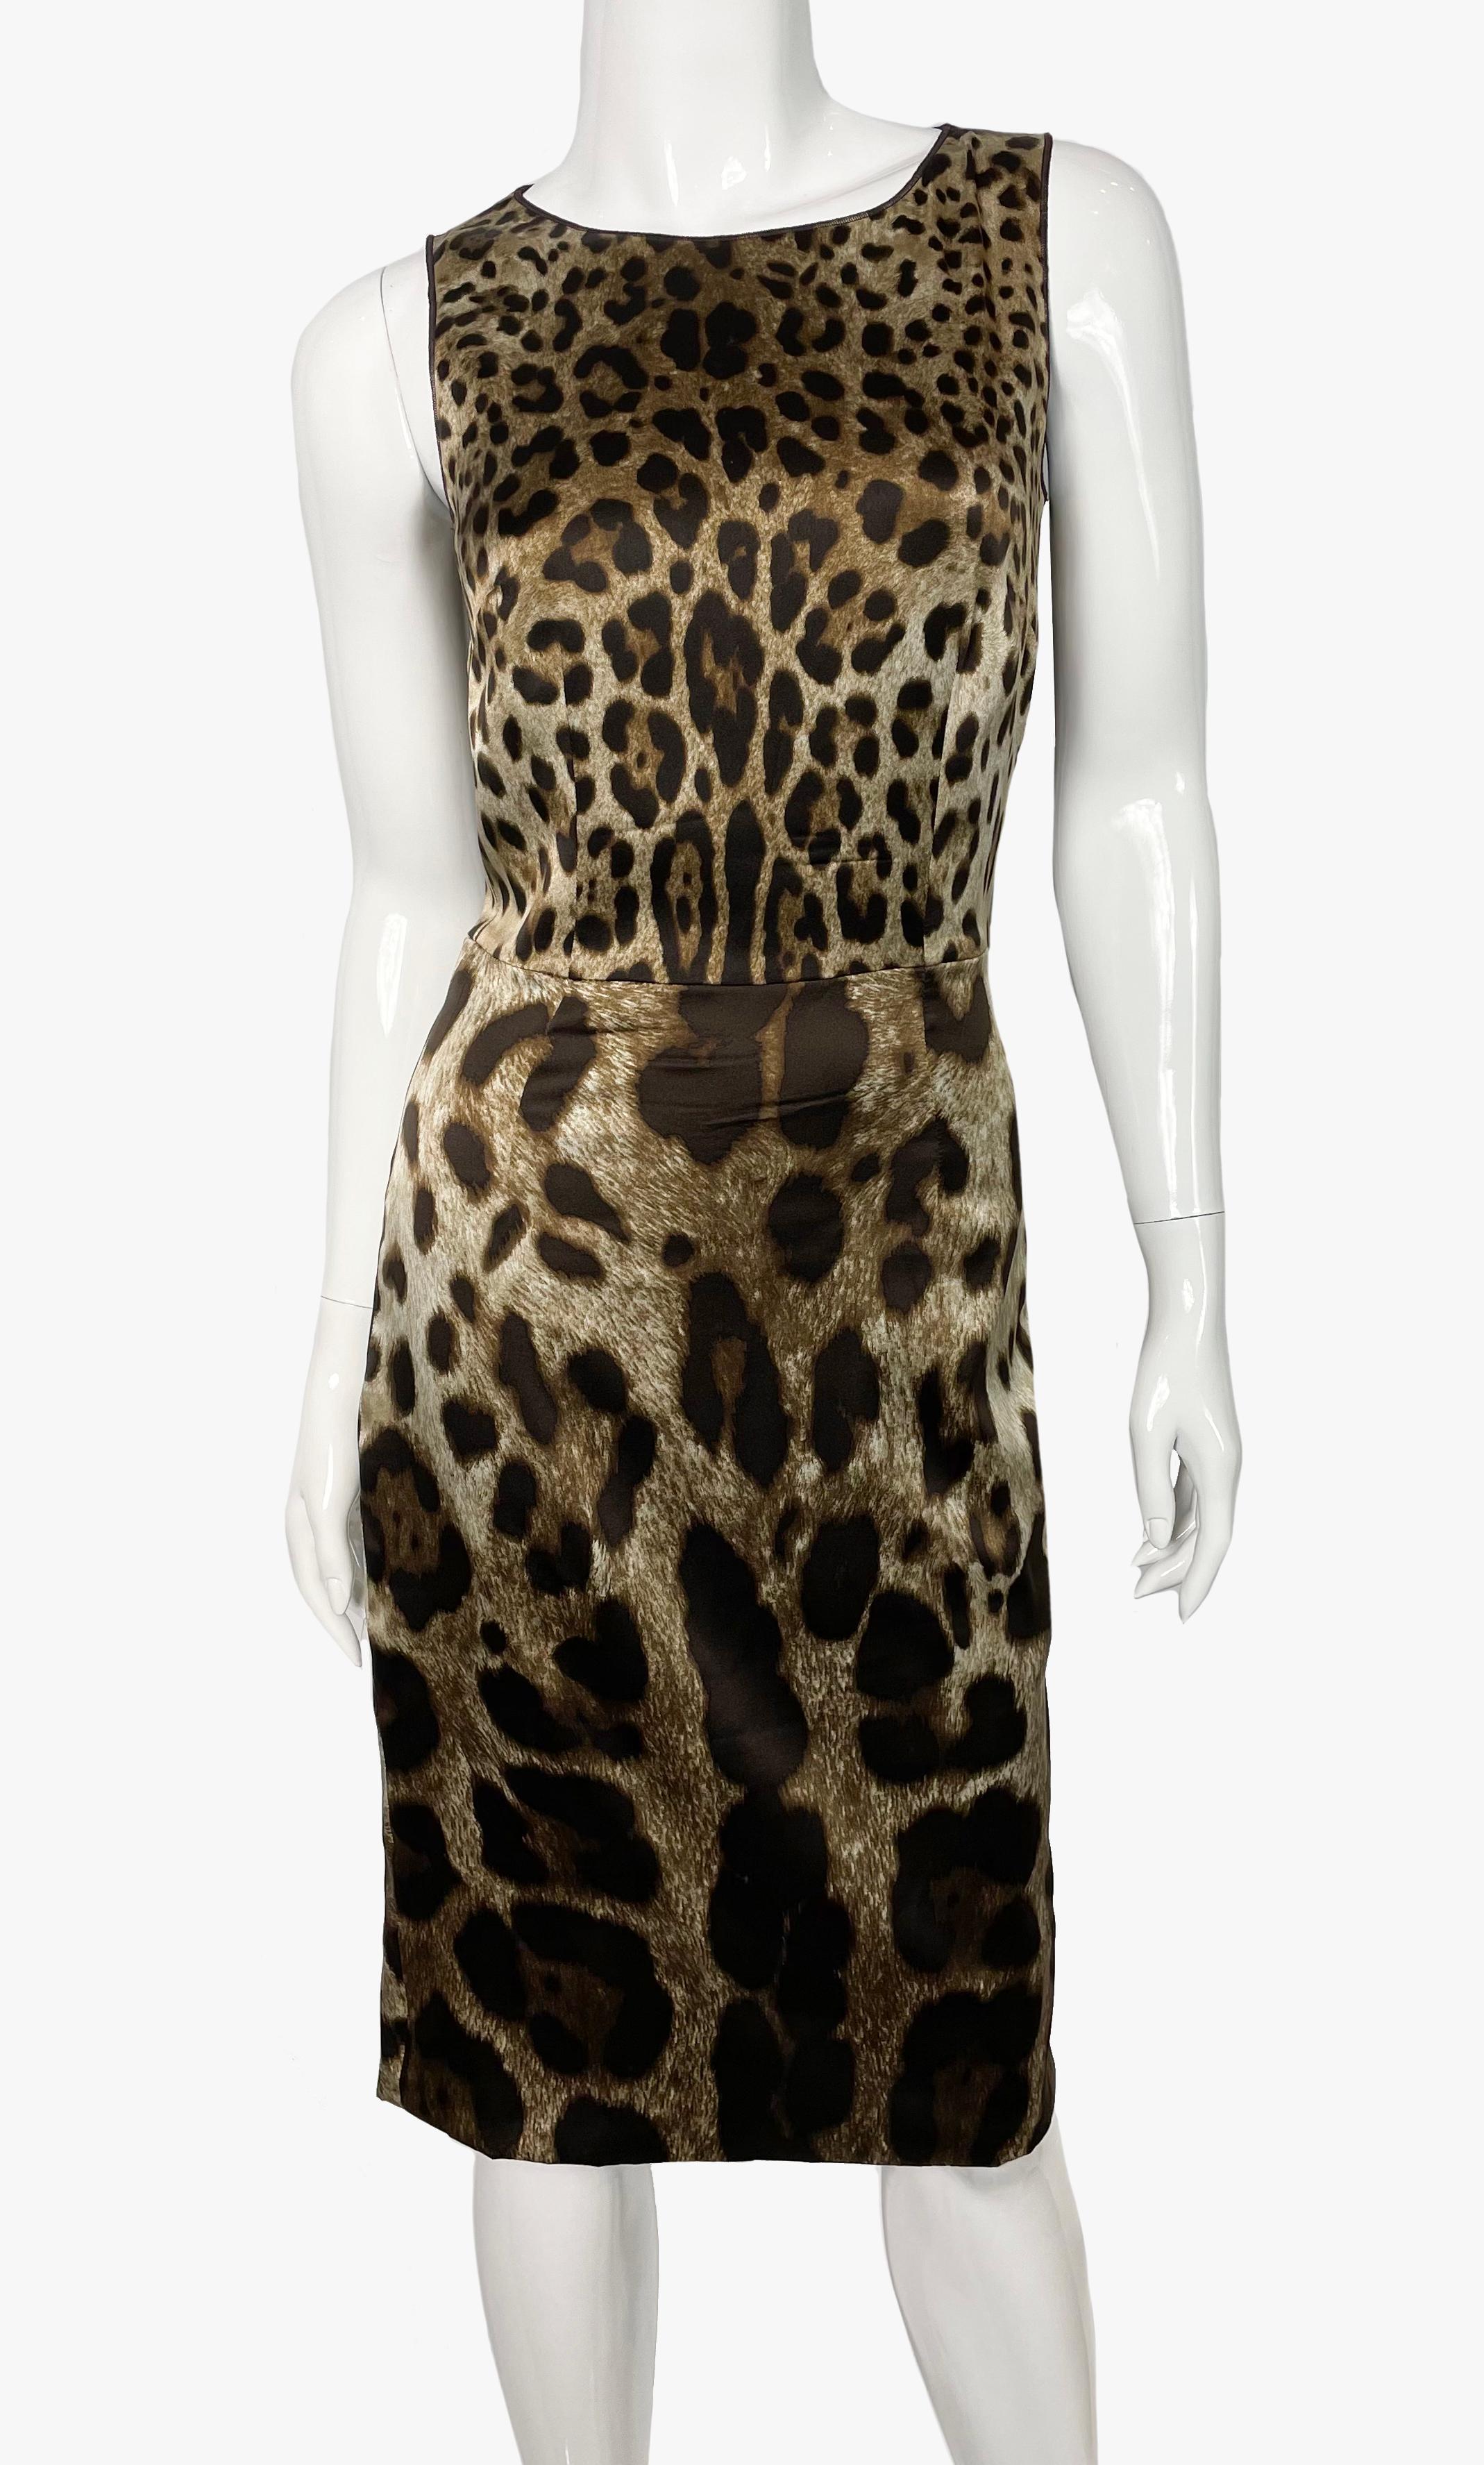 Dolce&Gabbana silk case dress with leopard print. 
Fastens with a zipper on the back, there is a slot on the skirt. 


Length - 101 cm
Armpit to armpit - 41 cm
Waist - 66 cm

Hips - 84 cm

Composition: 93% silk, 7% elastan

........Additional